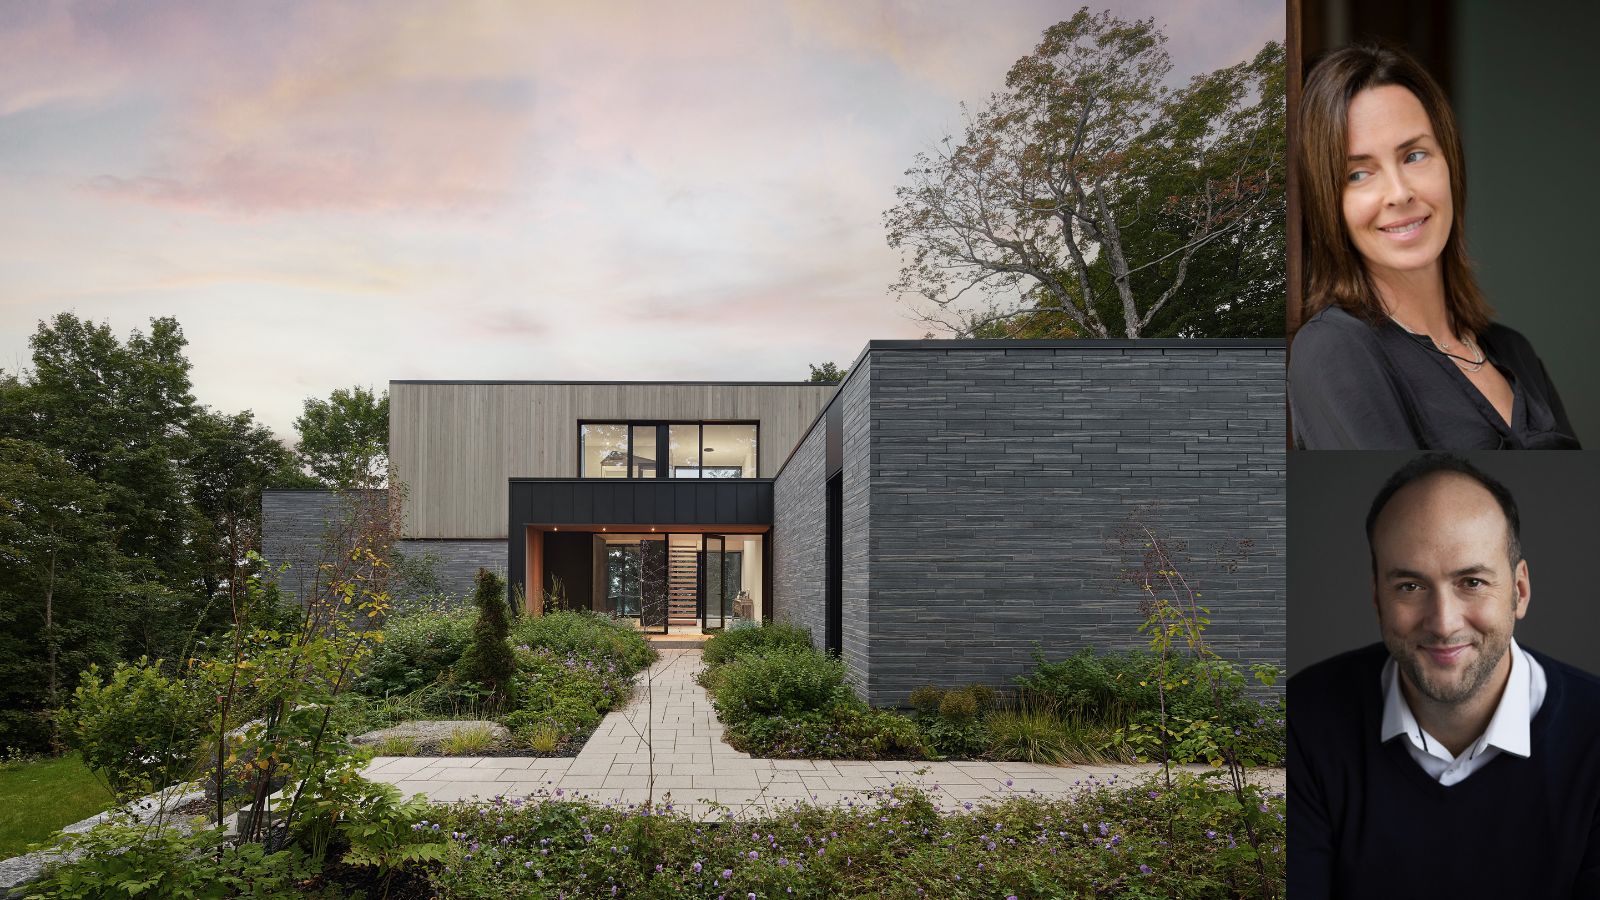 residential architecture project by mxma and catlin stothers in canada.